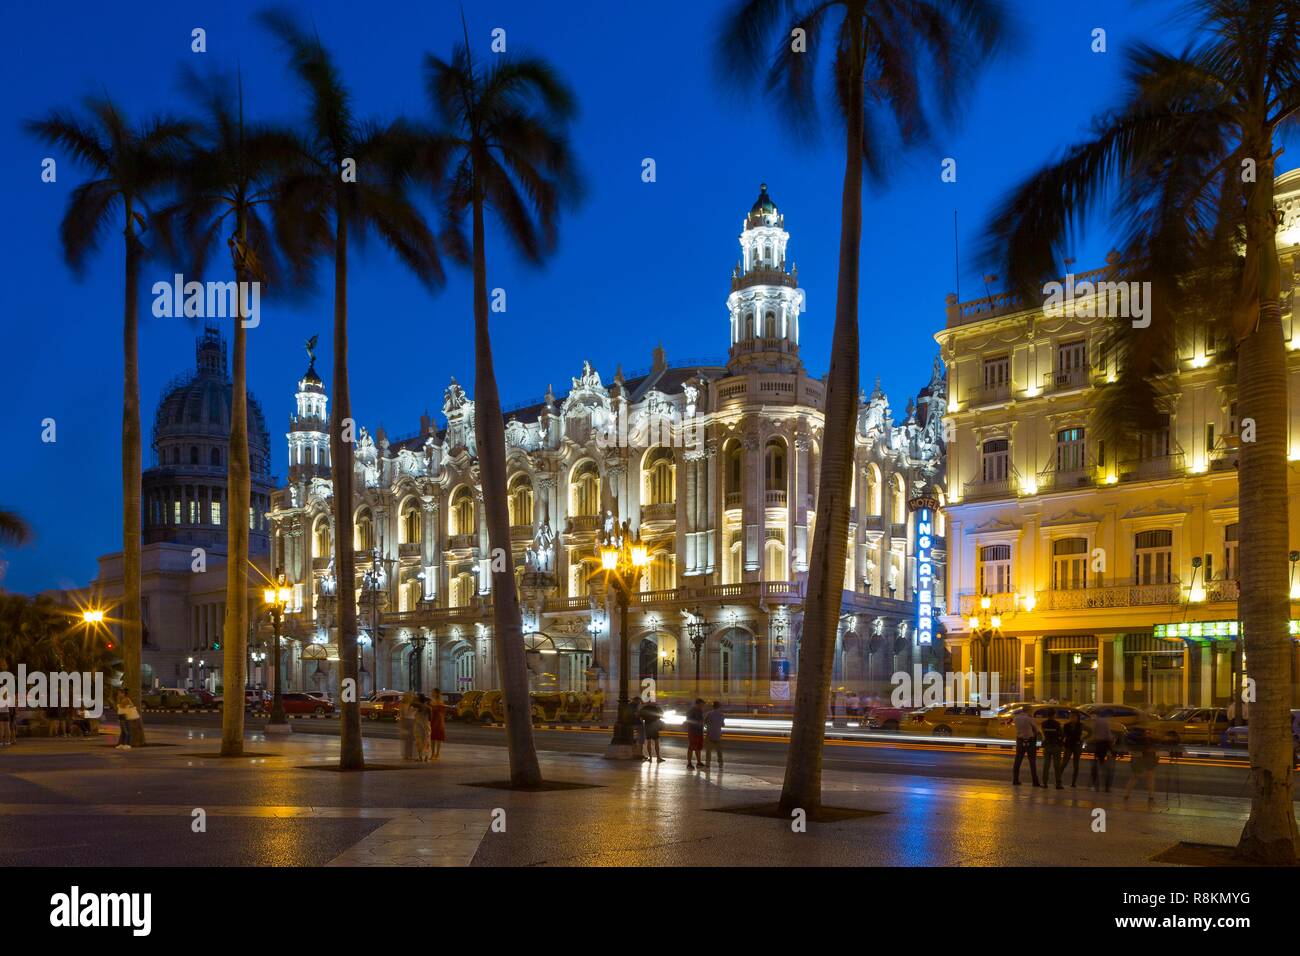 Cuba, Havana, district of Habana Vieja classified World Heritage by UNESCO, the Paseo de Marti or Prado, avenue lined with elegant mansions connecting the Malecon to the Capitol, the Parque Central, the Grand Theater of Havana (Gran Teatro de La Habana) and Inglaterra Hotel Stock Photo